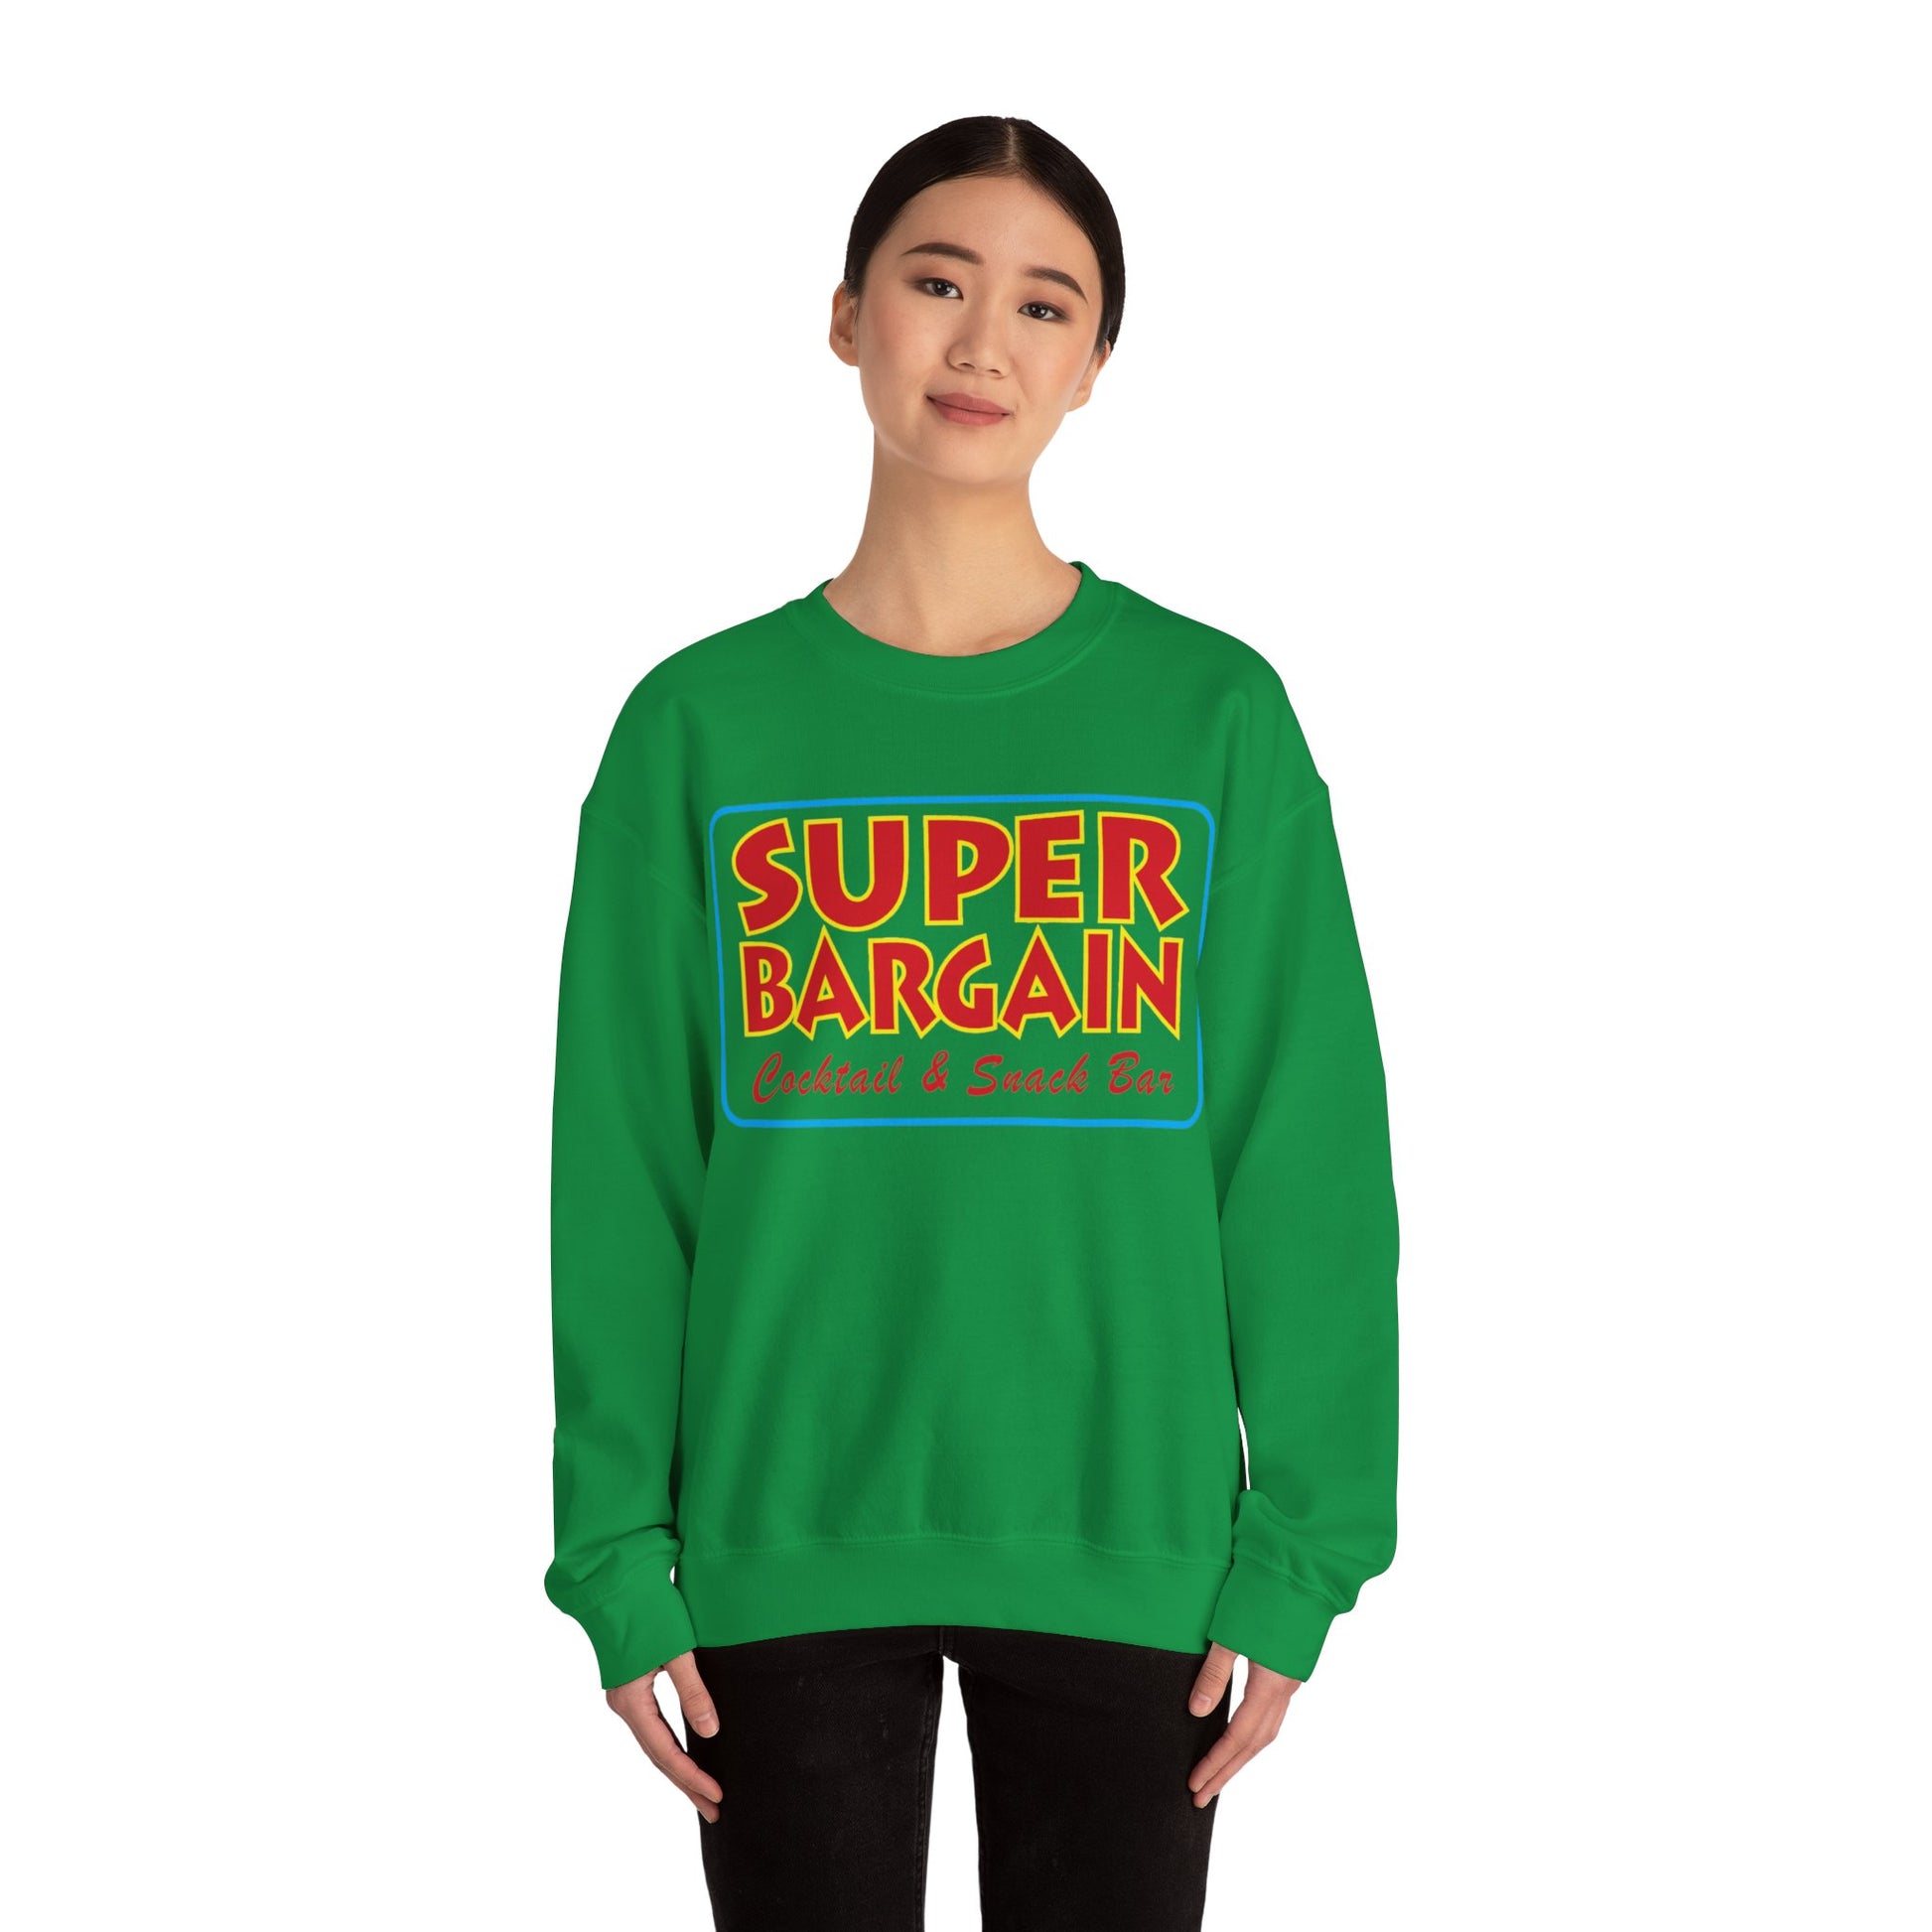 A woman in a green Unisex Heavy Blend™ Crewneck Signature Logo Sweatshirt with the words "SUPER BARGAIN Cocktails & Snack Bar" printed in colorful letters on the front, strolls through Cabbagetown, Toronto.